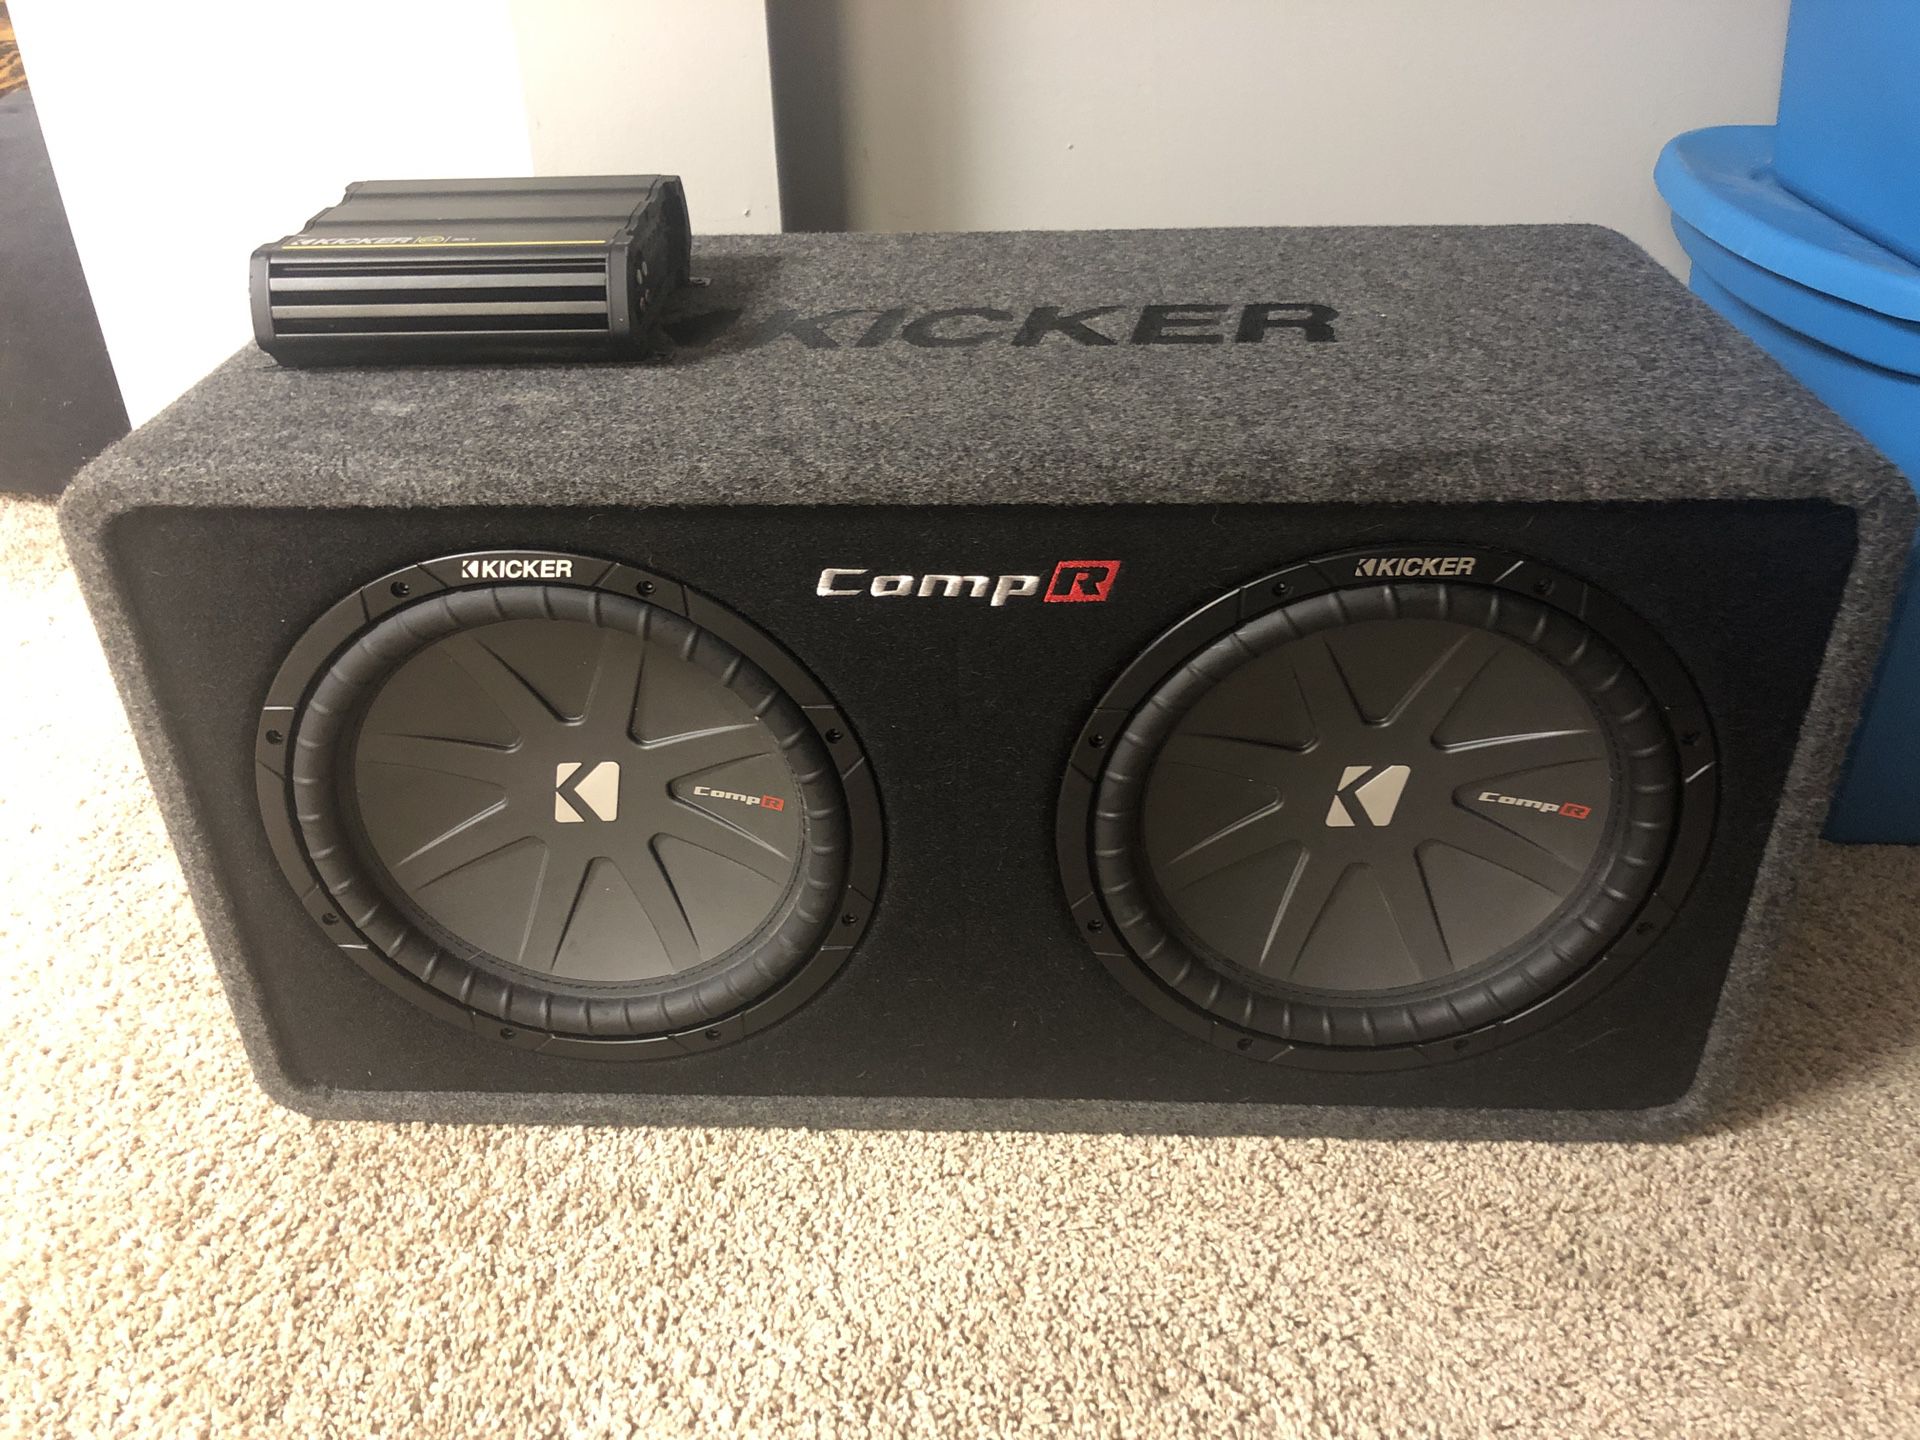 Kicker comp r speakers 12” with 600w amp